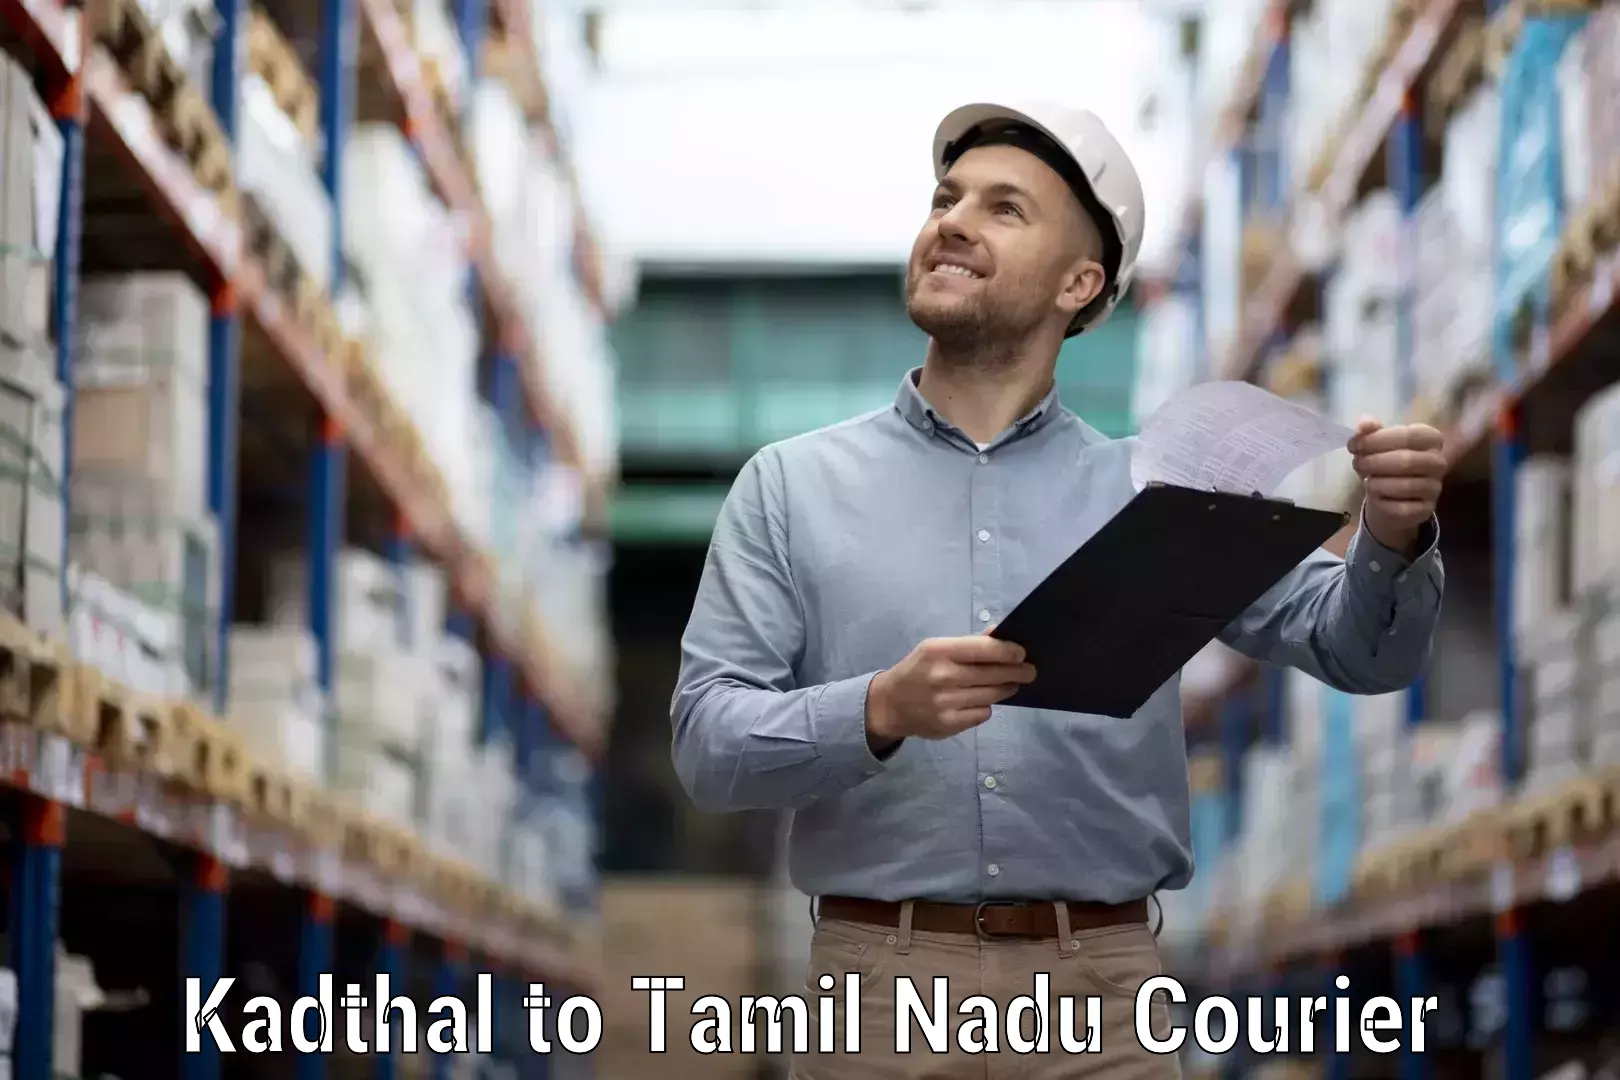 Tailored freight services Kadthal to Ambattur